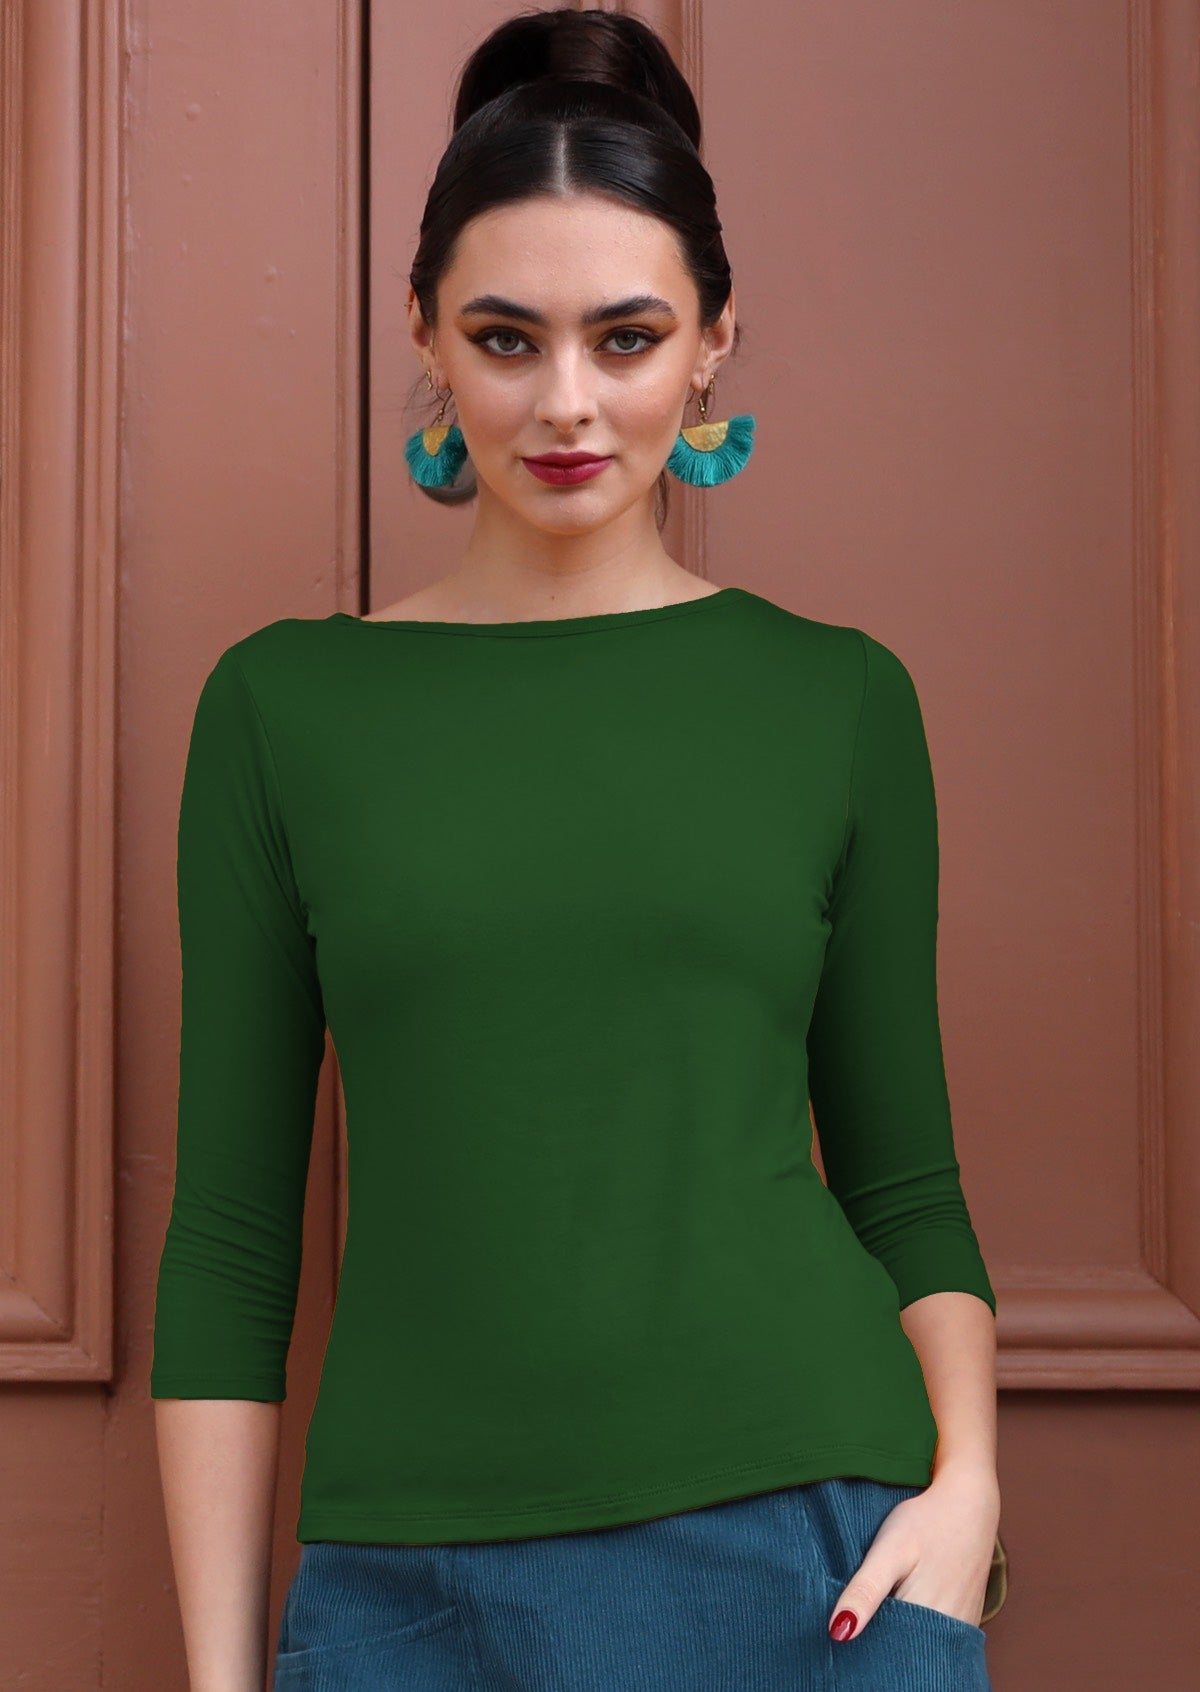 Woman wearing a rayon boat neck green 3/4 sleeve top and blue earrings.